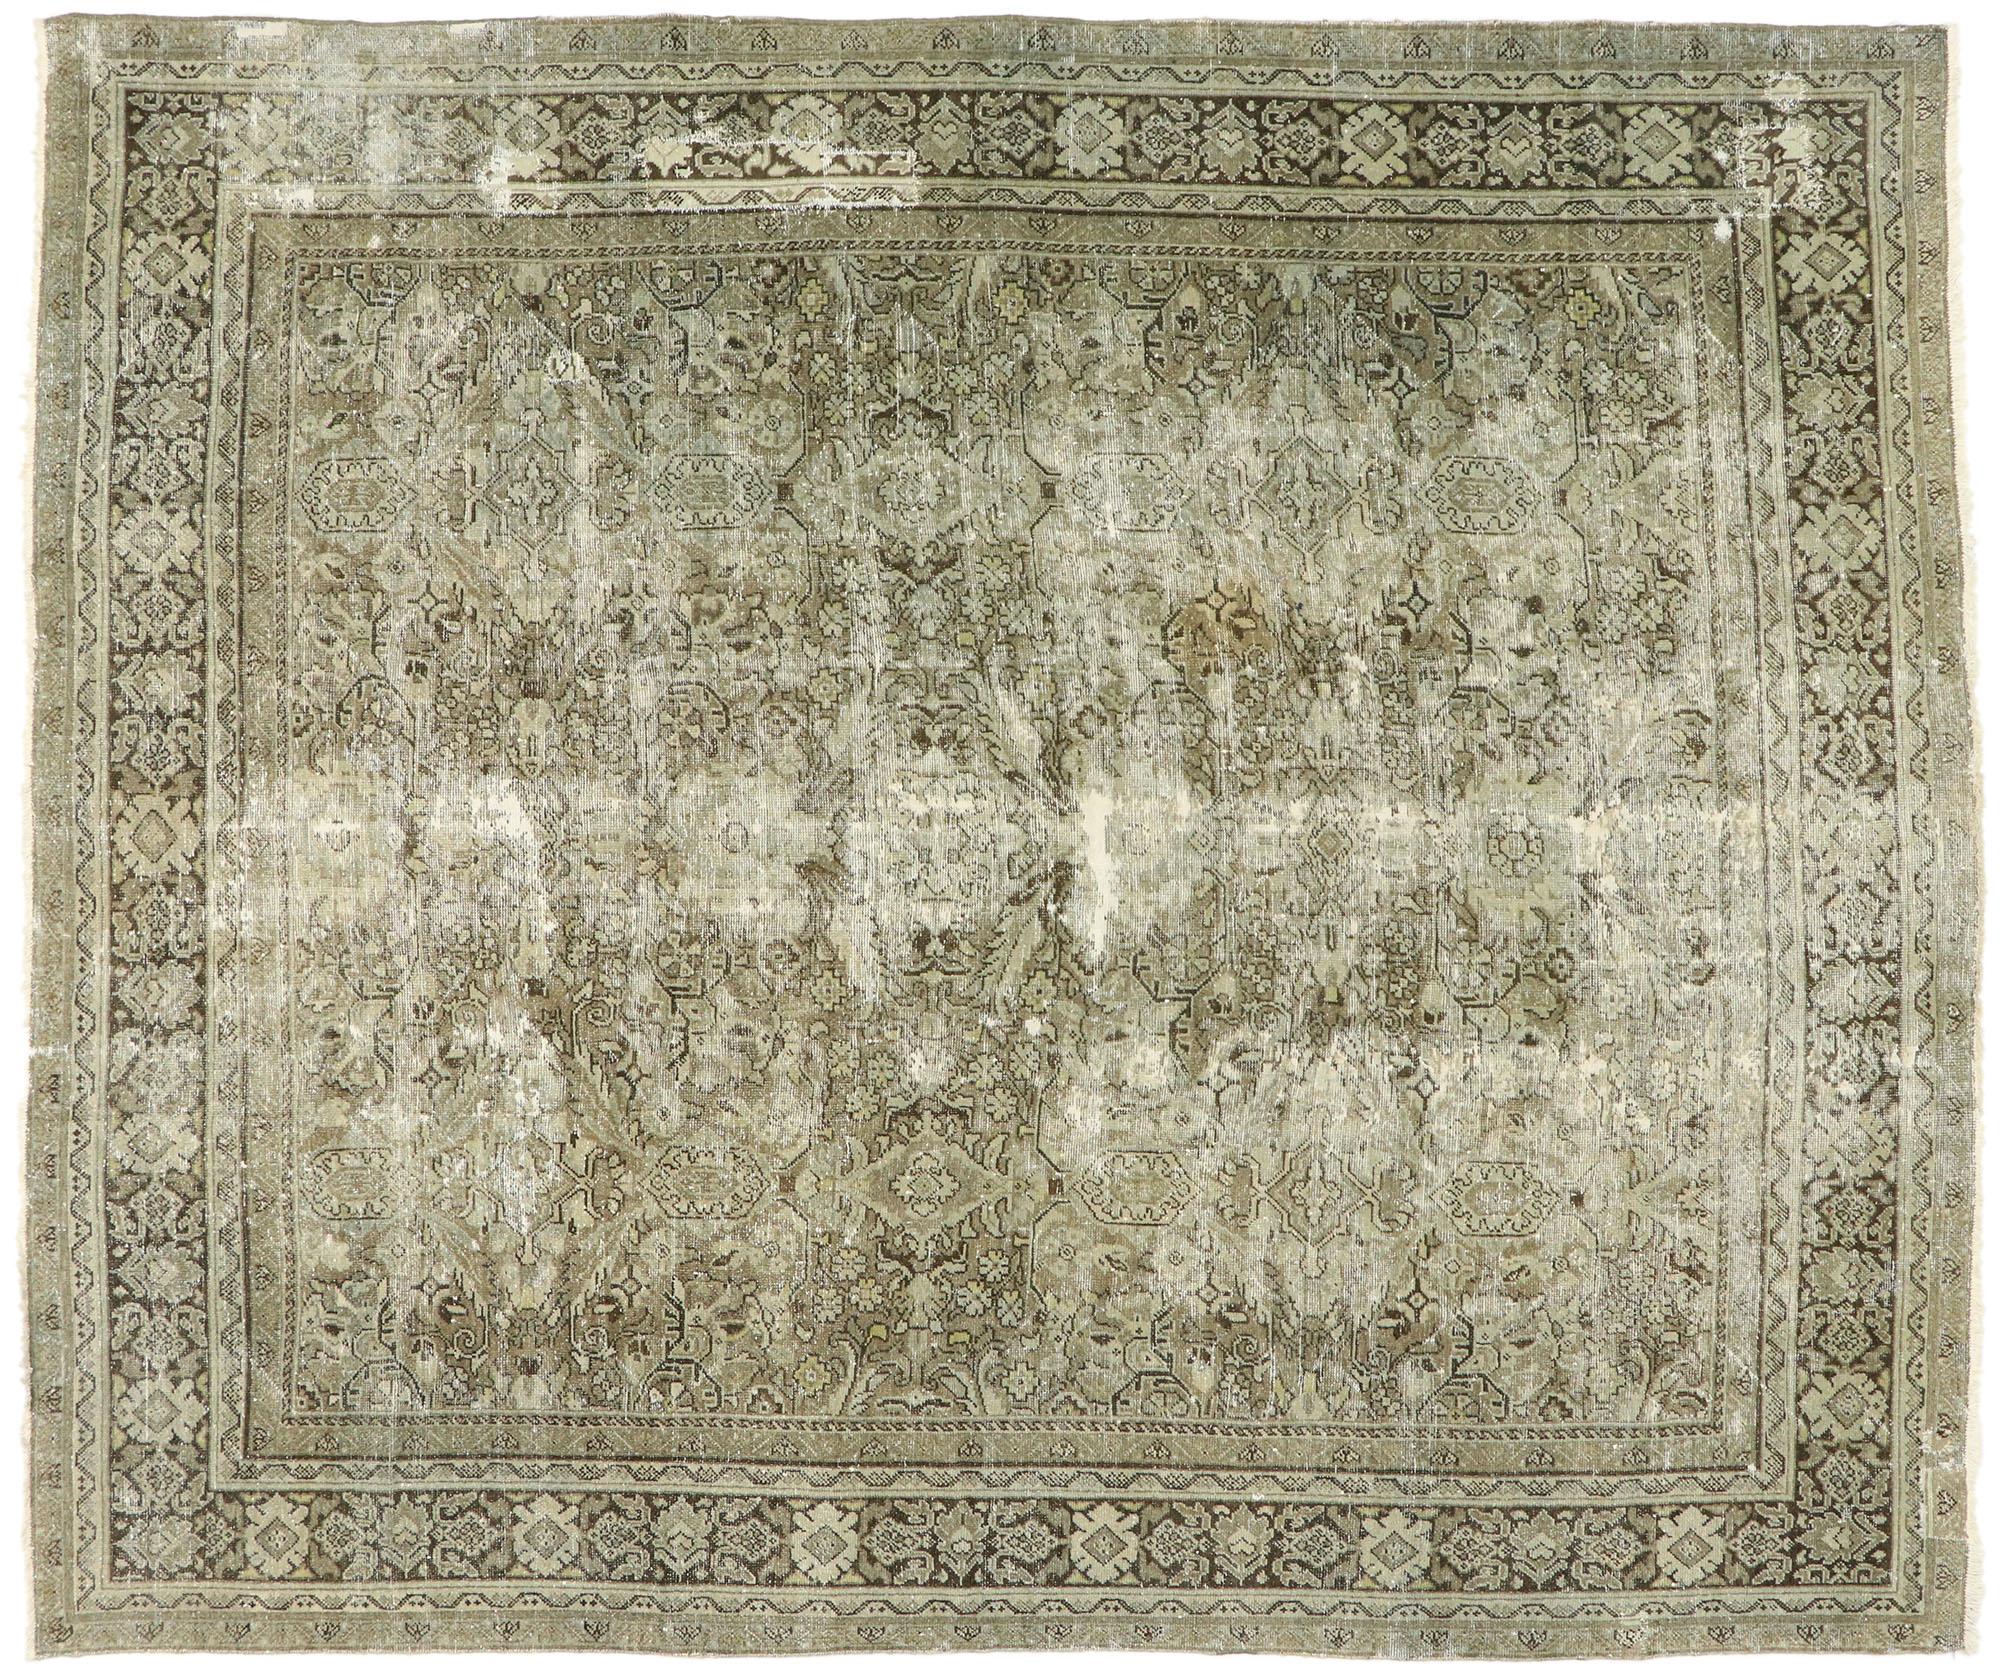 Wool Antique-Worn Persian Mahal Rug, Relaxed Refinement Meets Earth-Tone Elegance